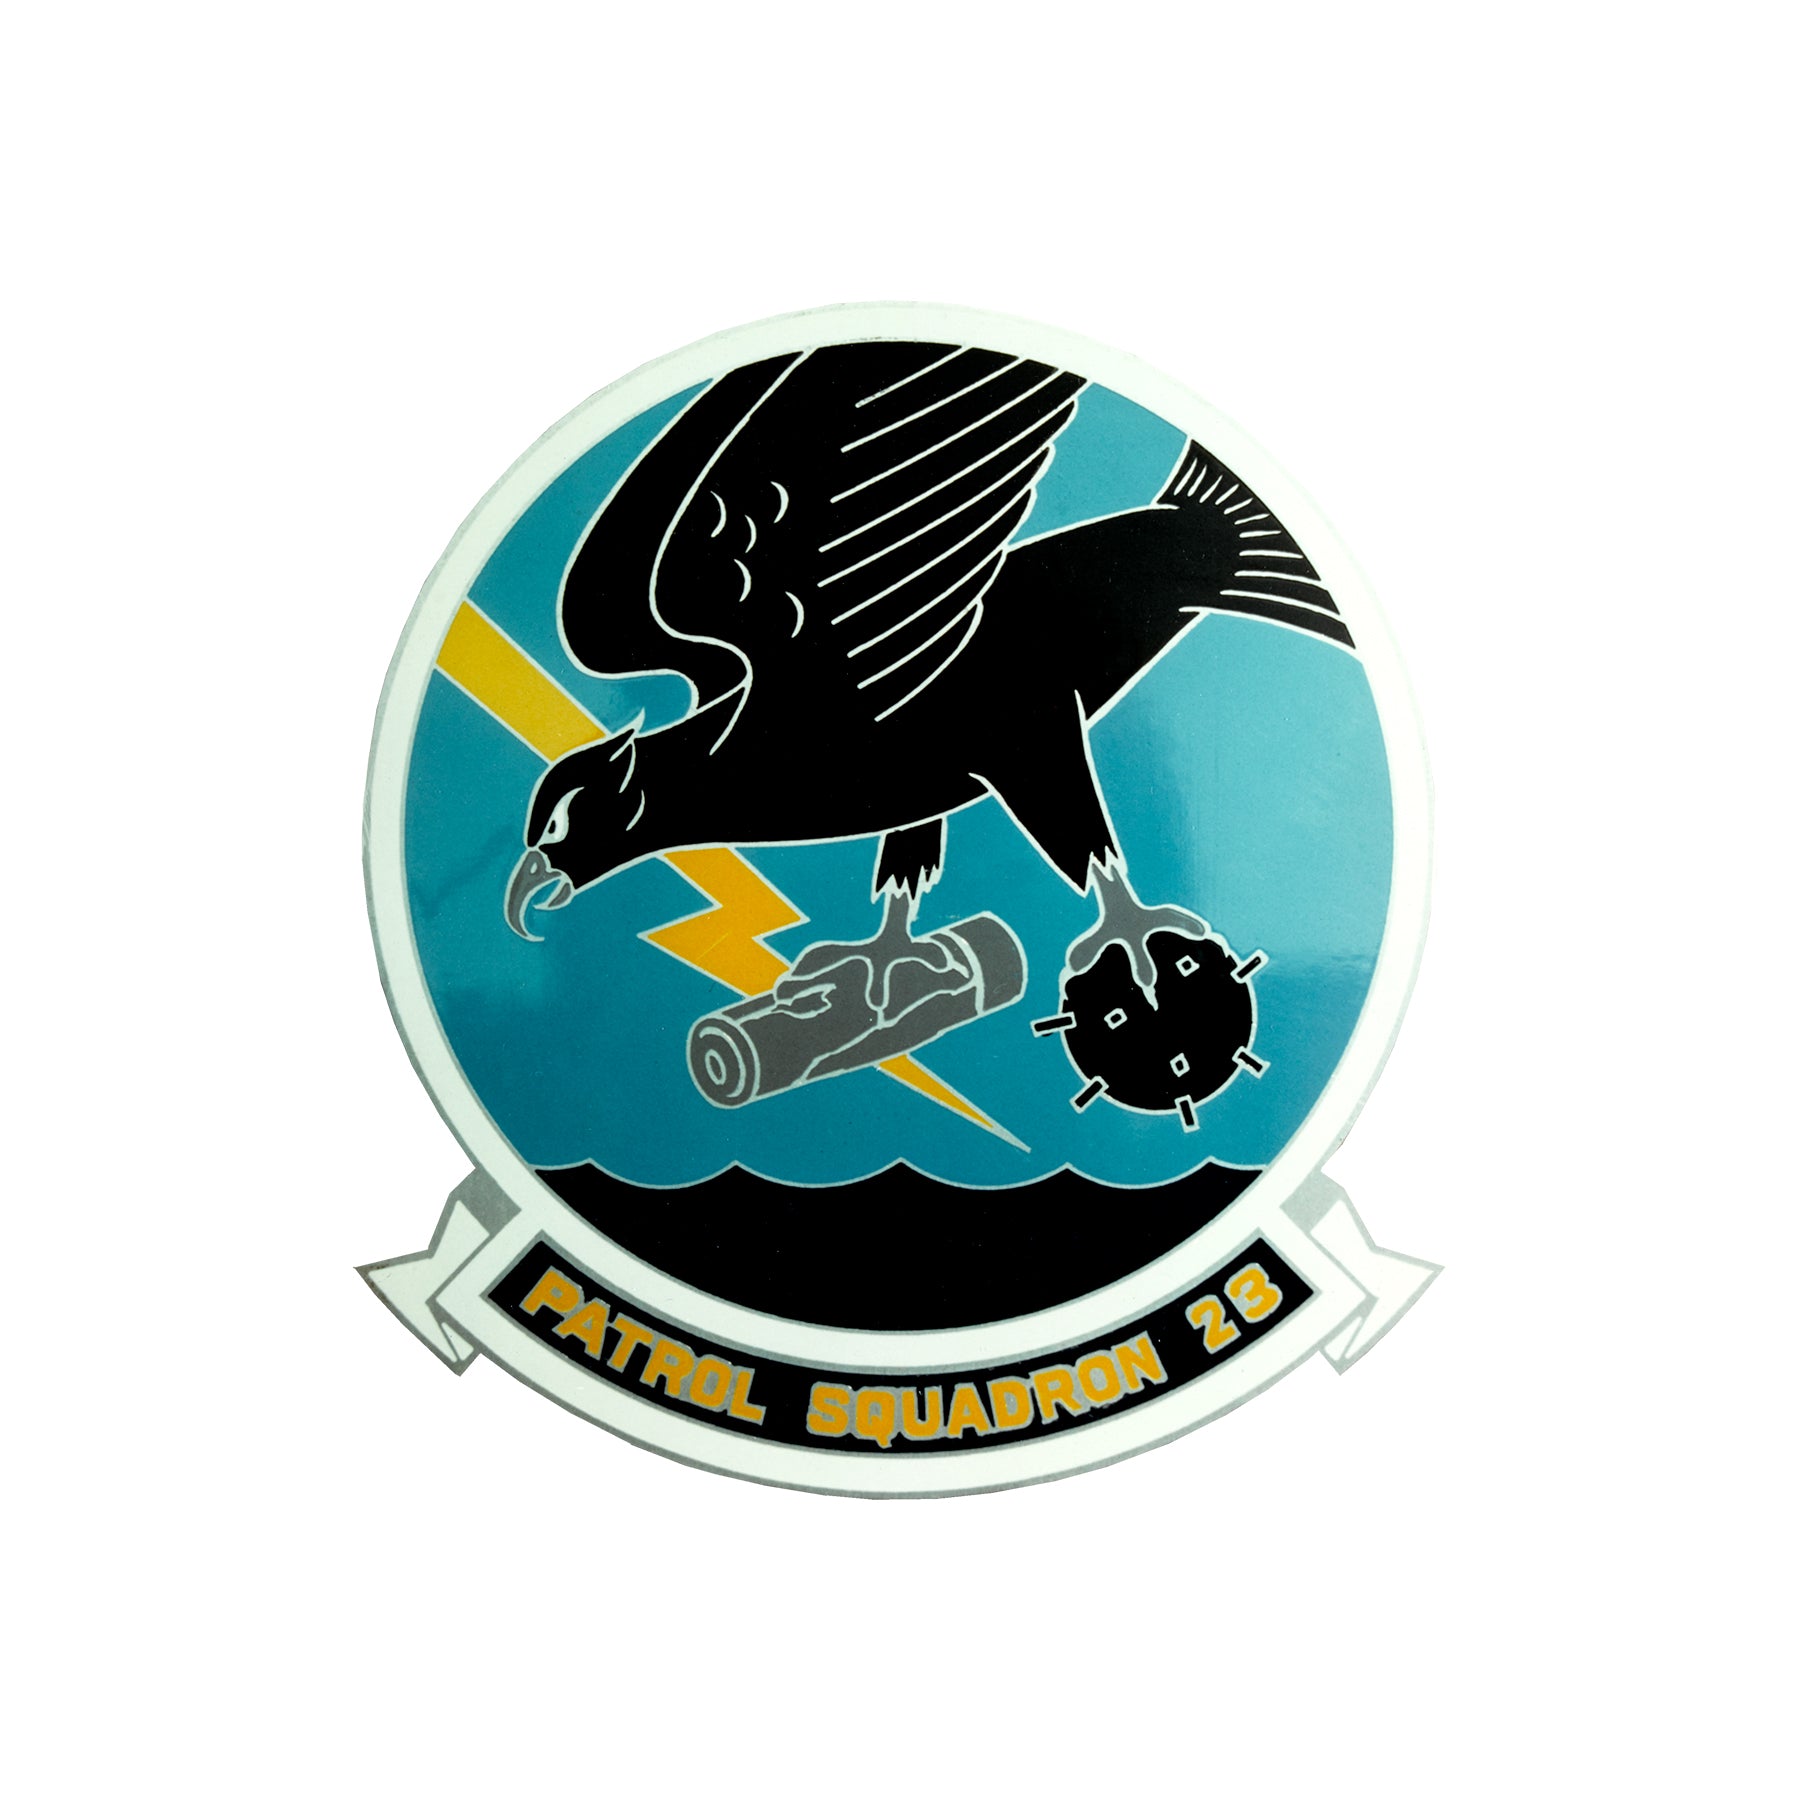 Patrol Squadron 23 - Patch Vinyl Decal - Available in Multiple Sizes